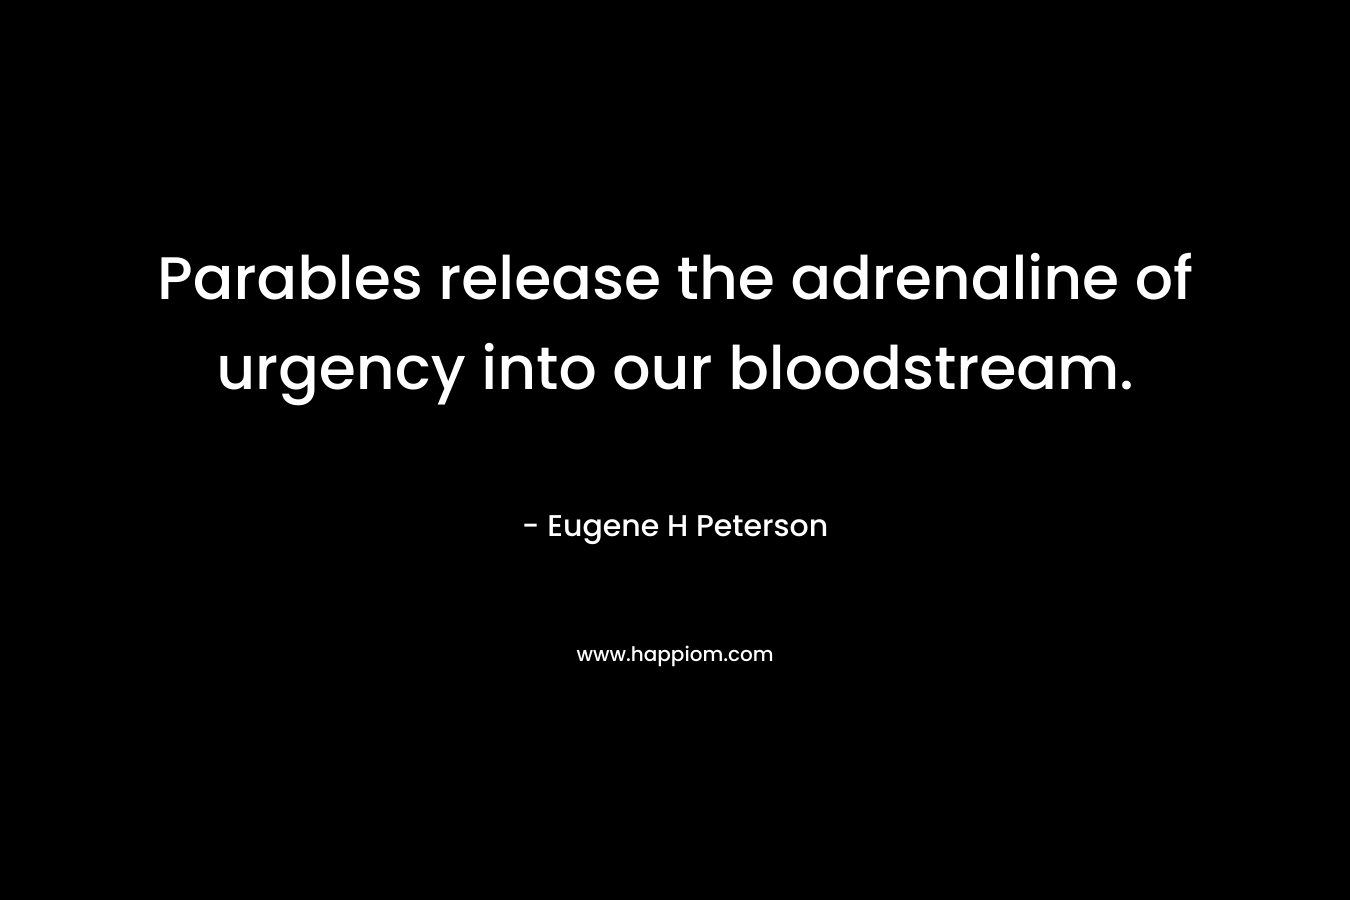 Parables release the adrenaline of urgency into our bloodstream. – Eugene H Peterson